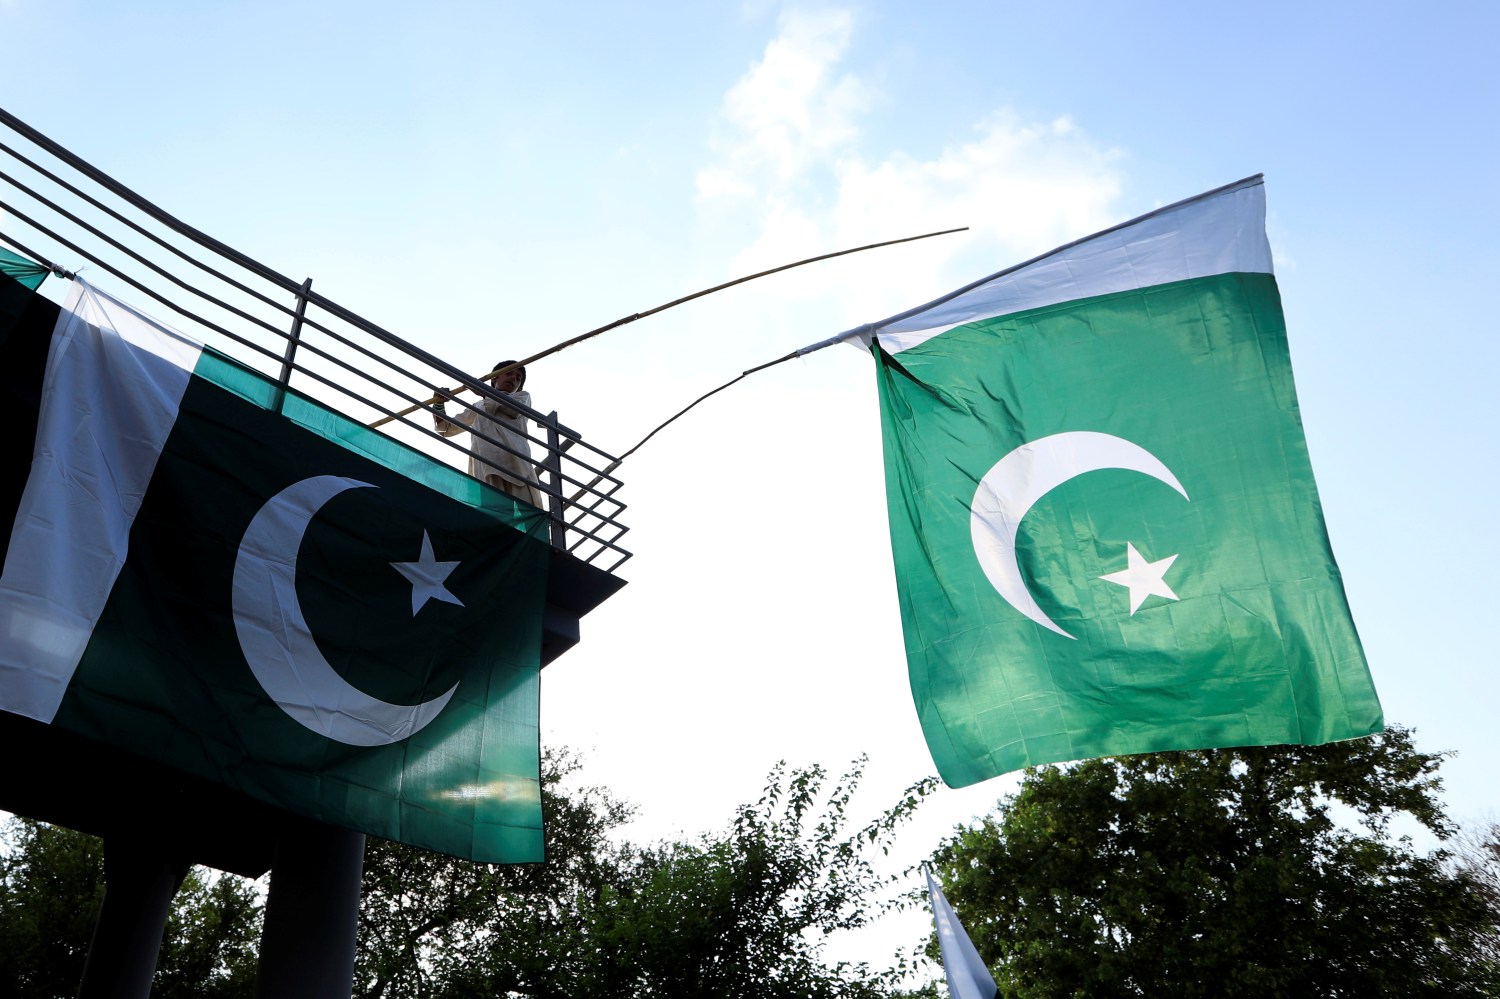 FILE PHOTO: A boy uses a bamboo stick to adjust national flags at an overhead bridge ahead of Pakistan's Independence Day, in Islamabad, Pakistan August 10, 2018. REUTERS/Faisal Mahmood